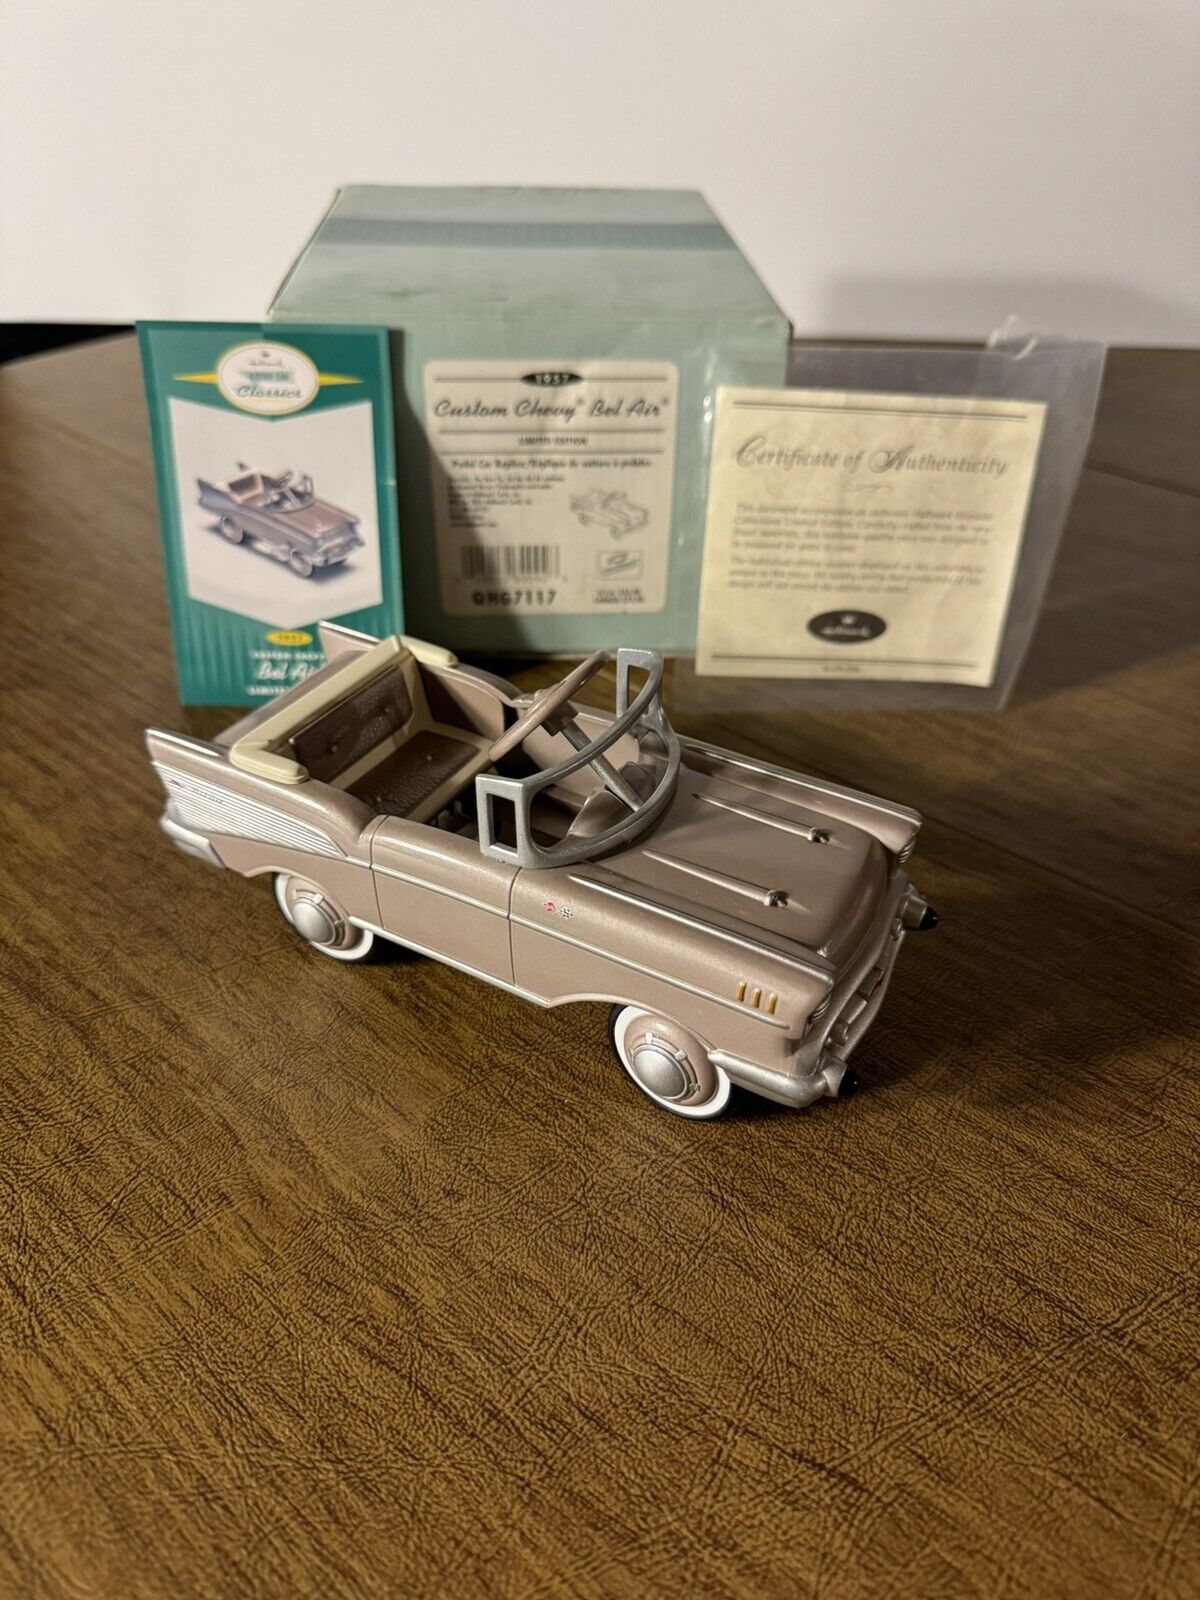 Hallmark Limited Edition 1957 Chevy Bel Air in Excellent Condition QHG7117